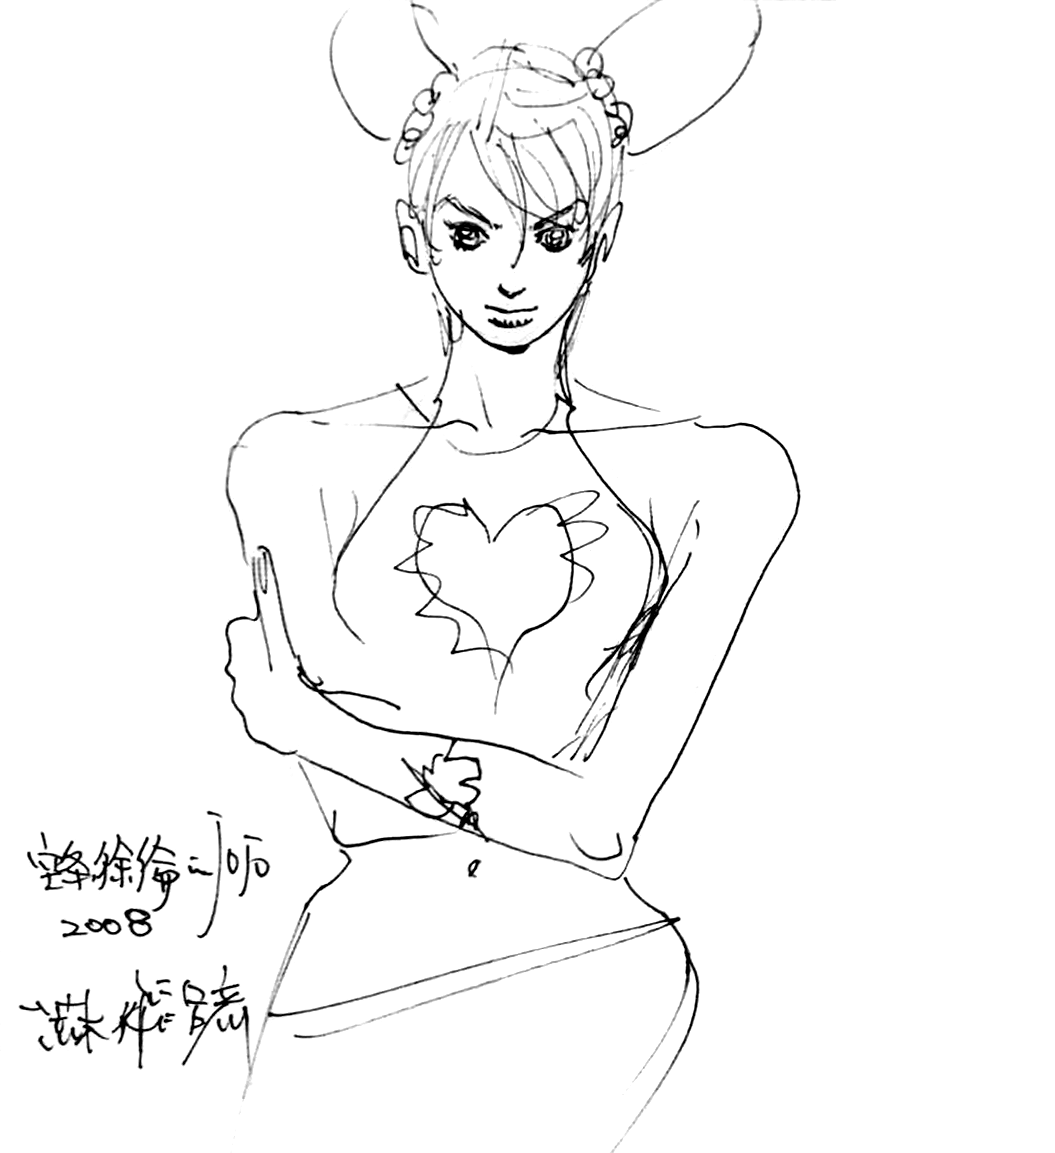 Jolyne rough doodle with crossed arms and Araki's signature